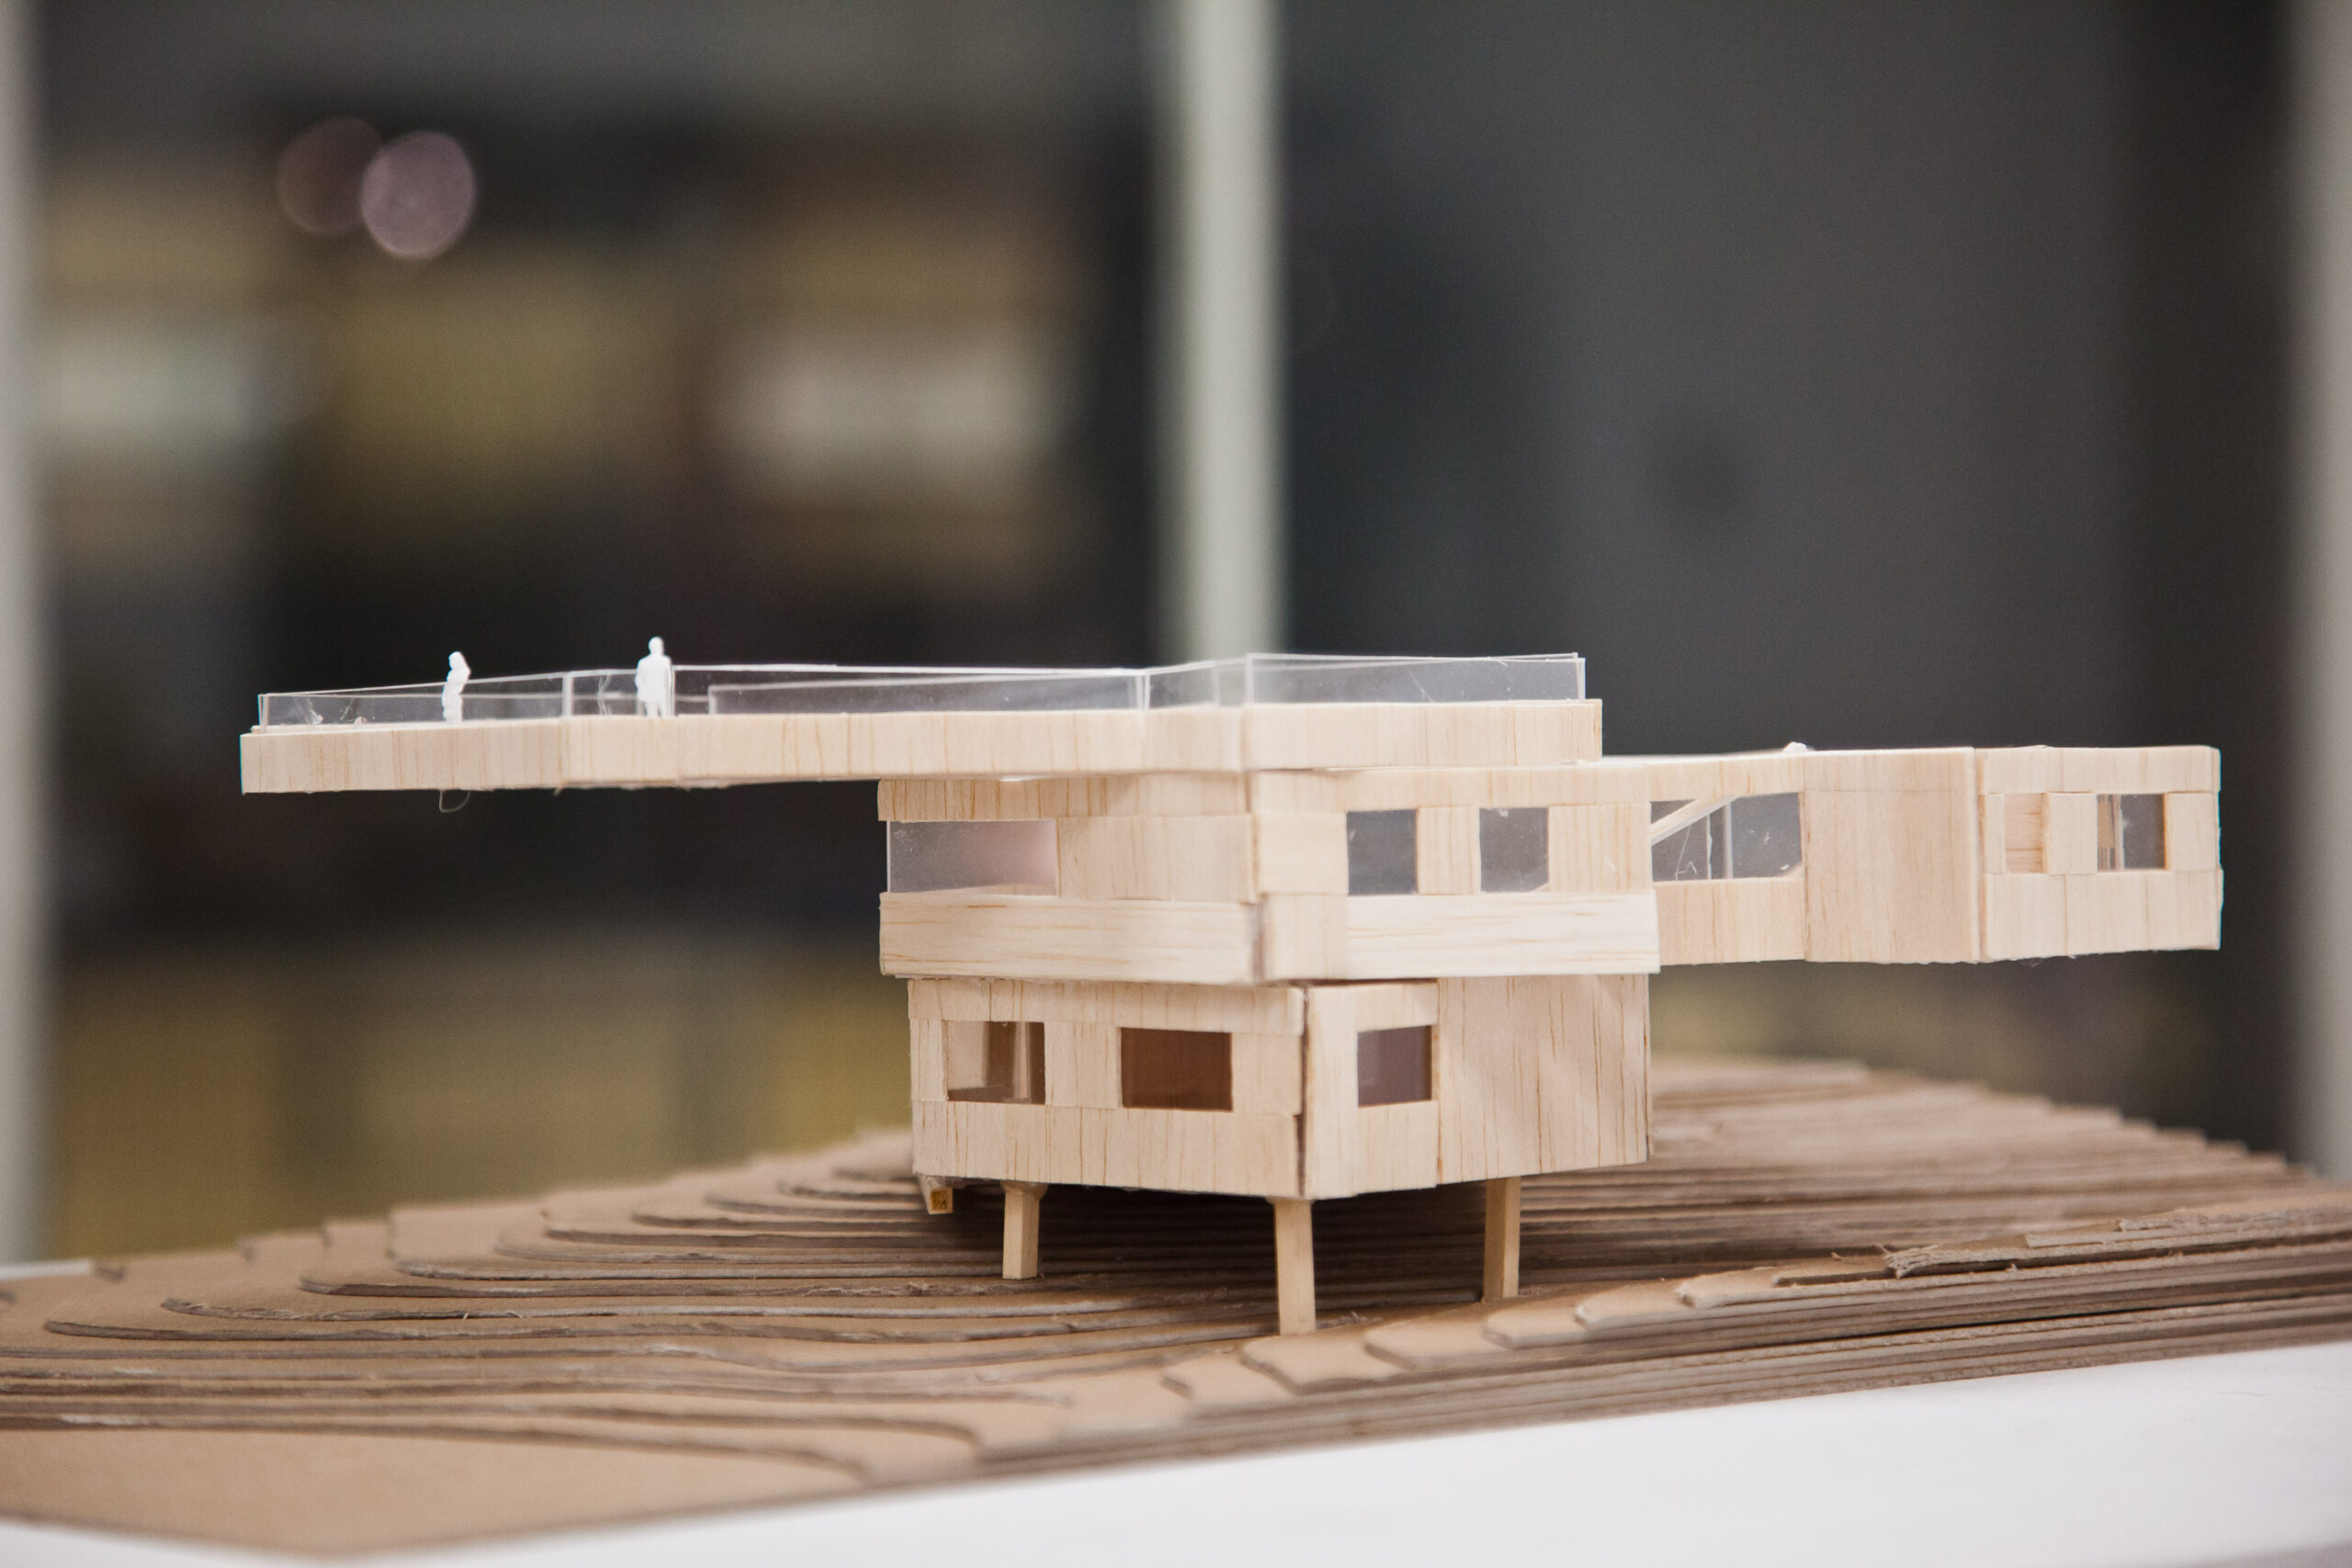 An architectural model of a building.